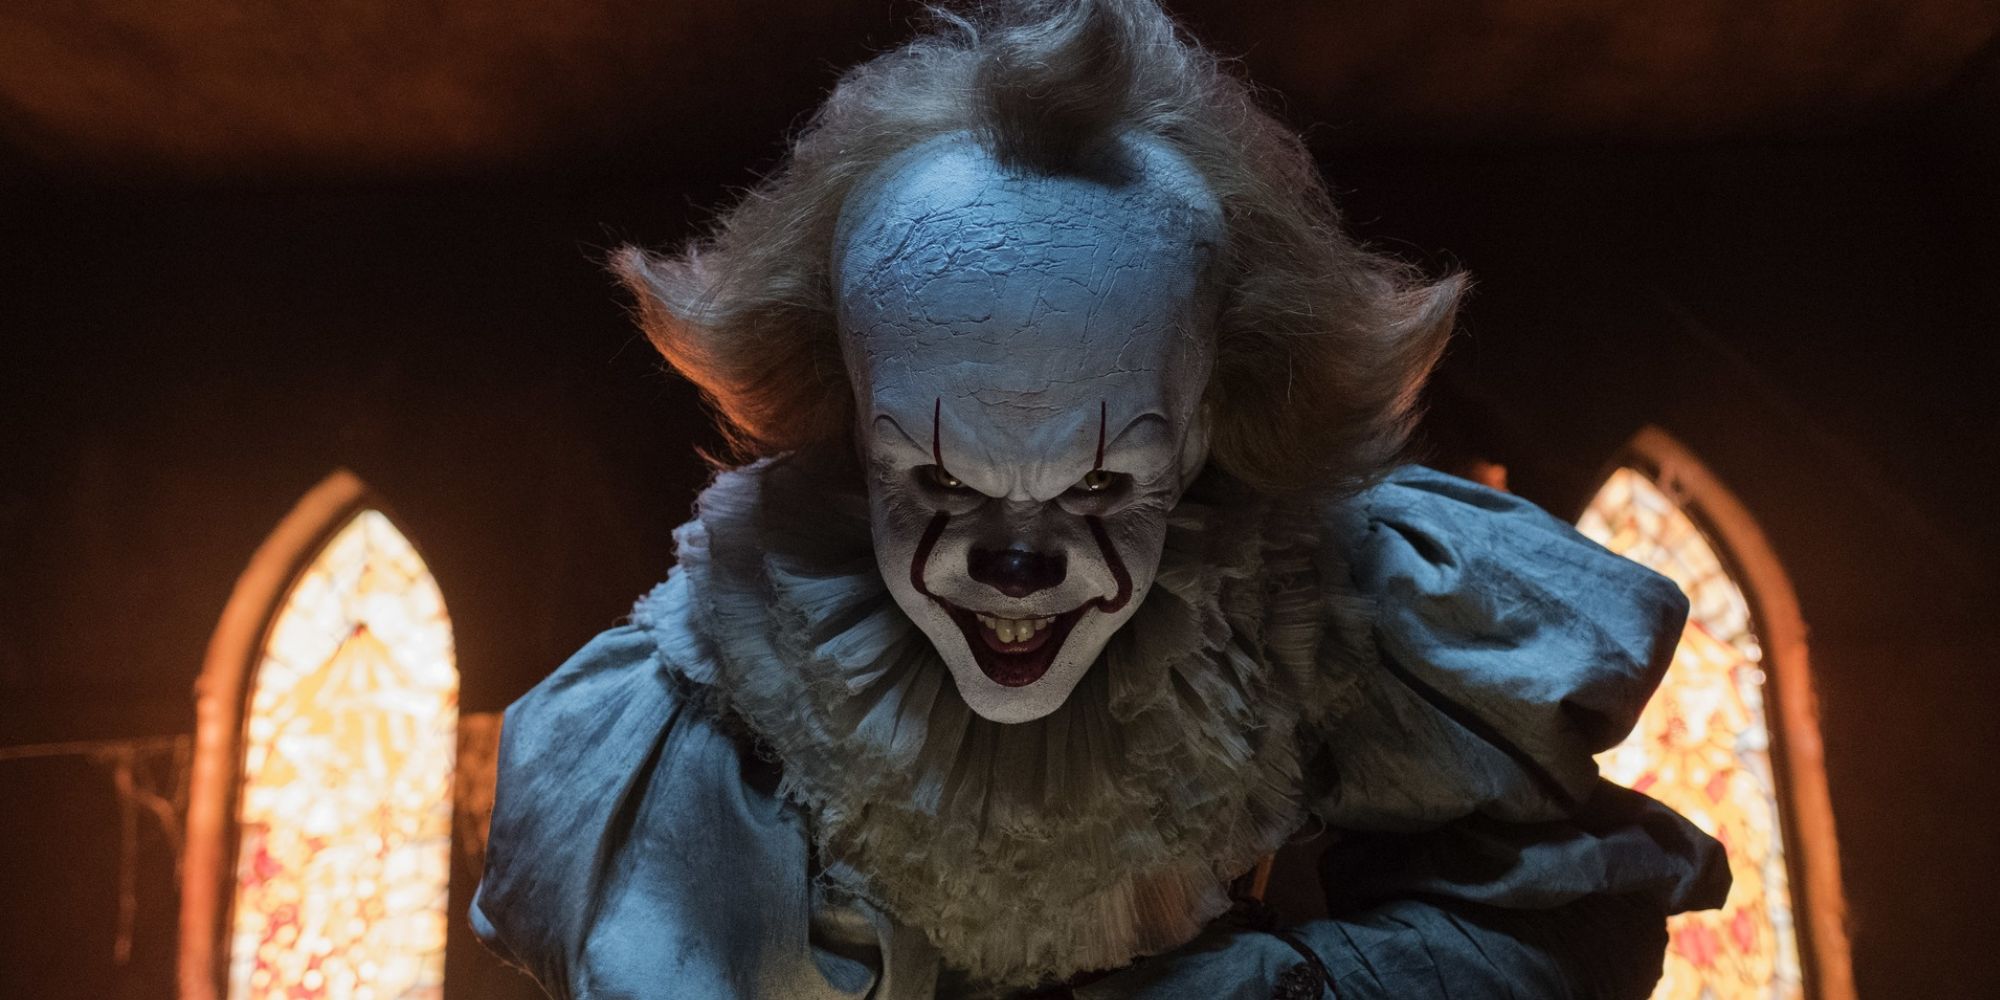 Pennywise smiling evilly in 'It' (2017)